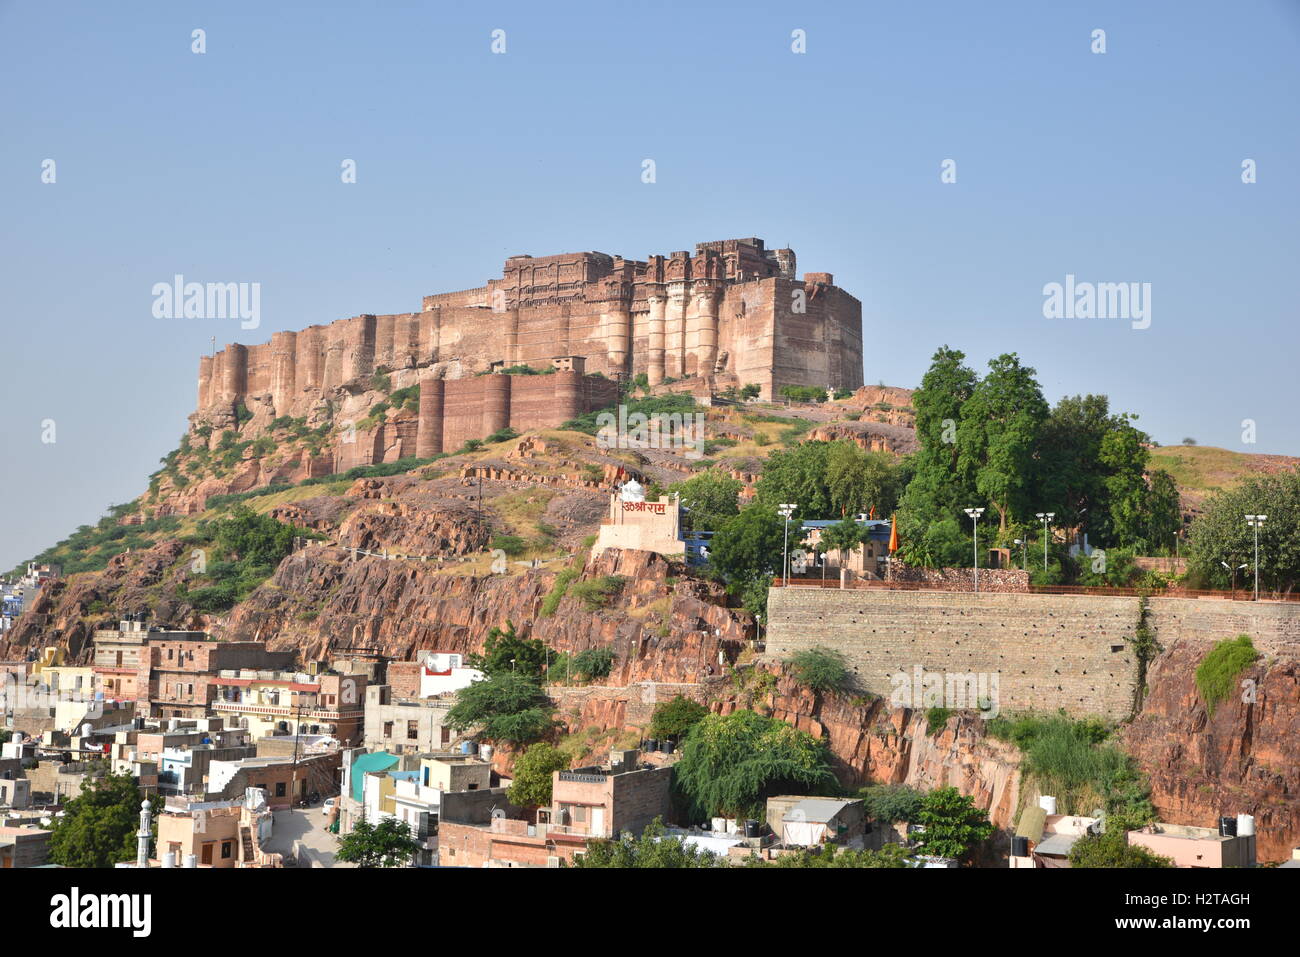 Majestic Mehrangarh Fort located in Jodhpur, Rajasthan,India. Very Famous  Vintage landmark icon of Rulers in Rajasthan Stock Photo - Alamy